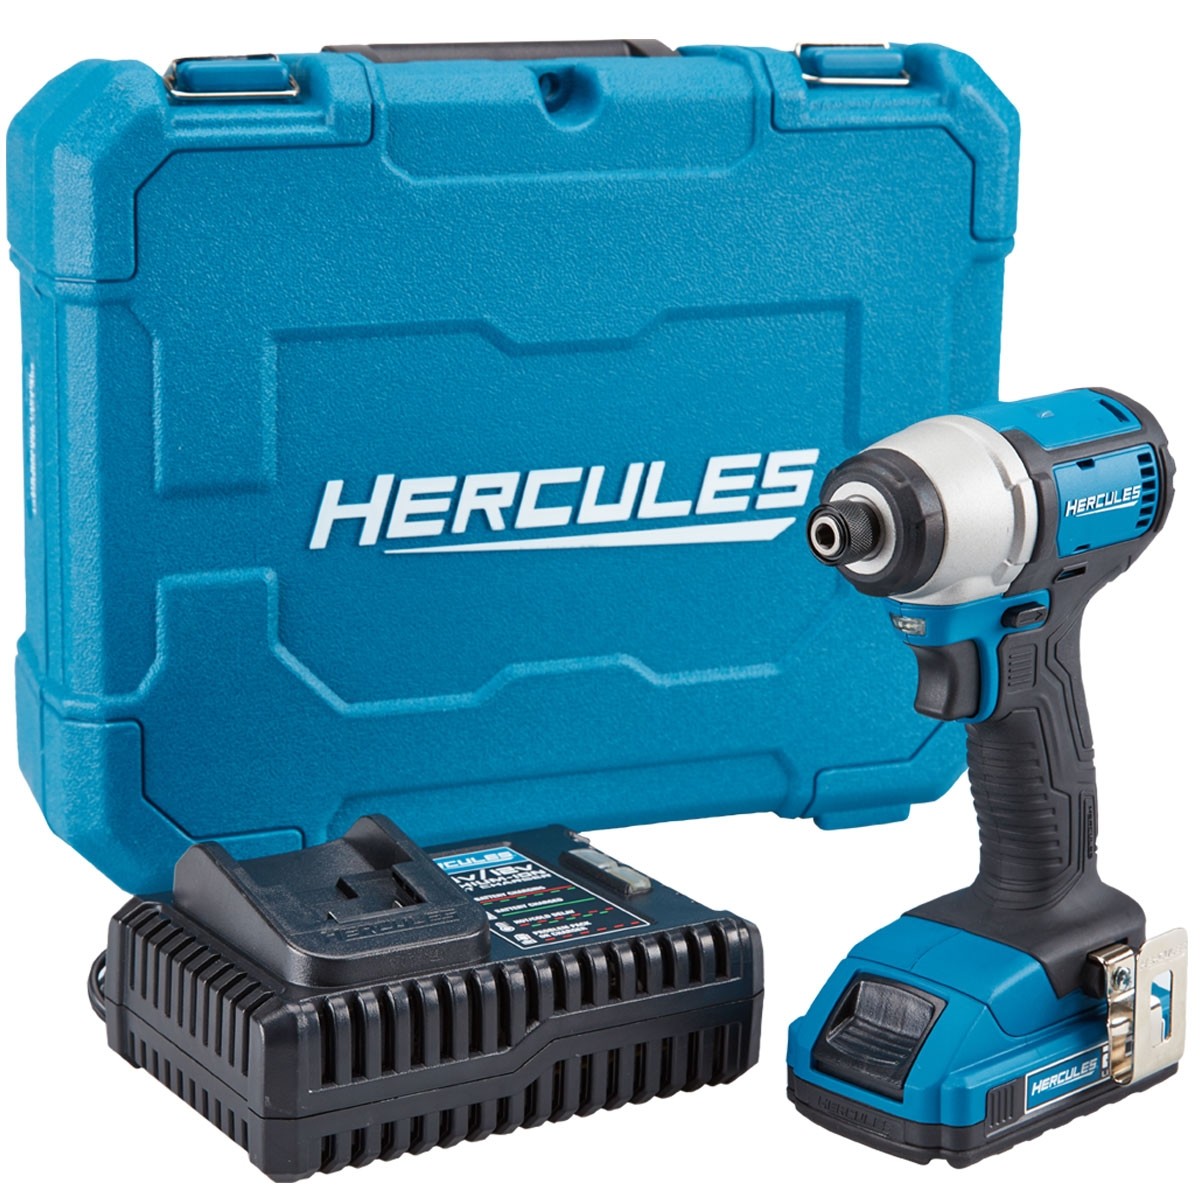 Hercules 20V Cordless Power Tools - Is Harbor Freight Selling Blue 